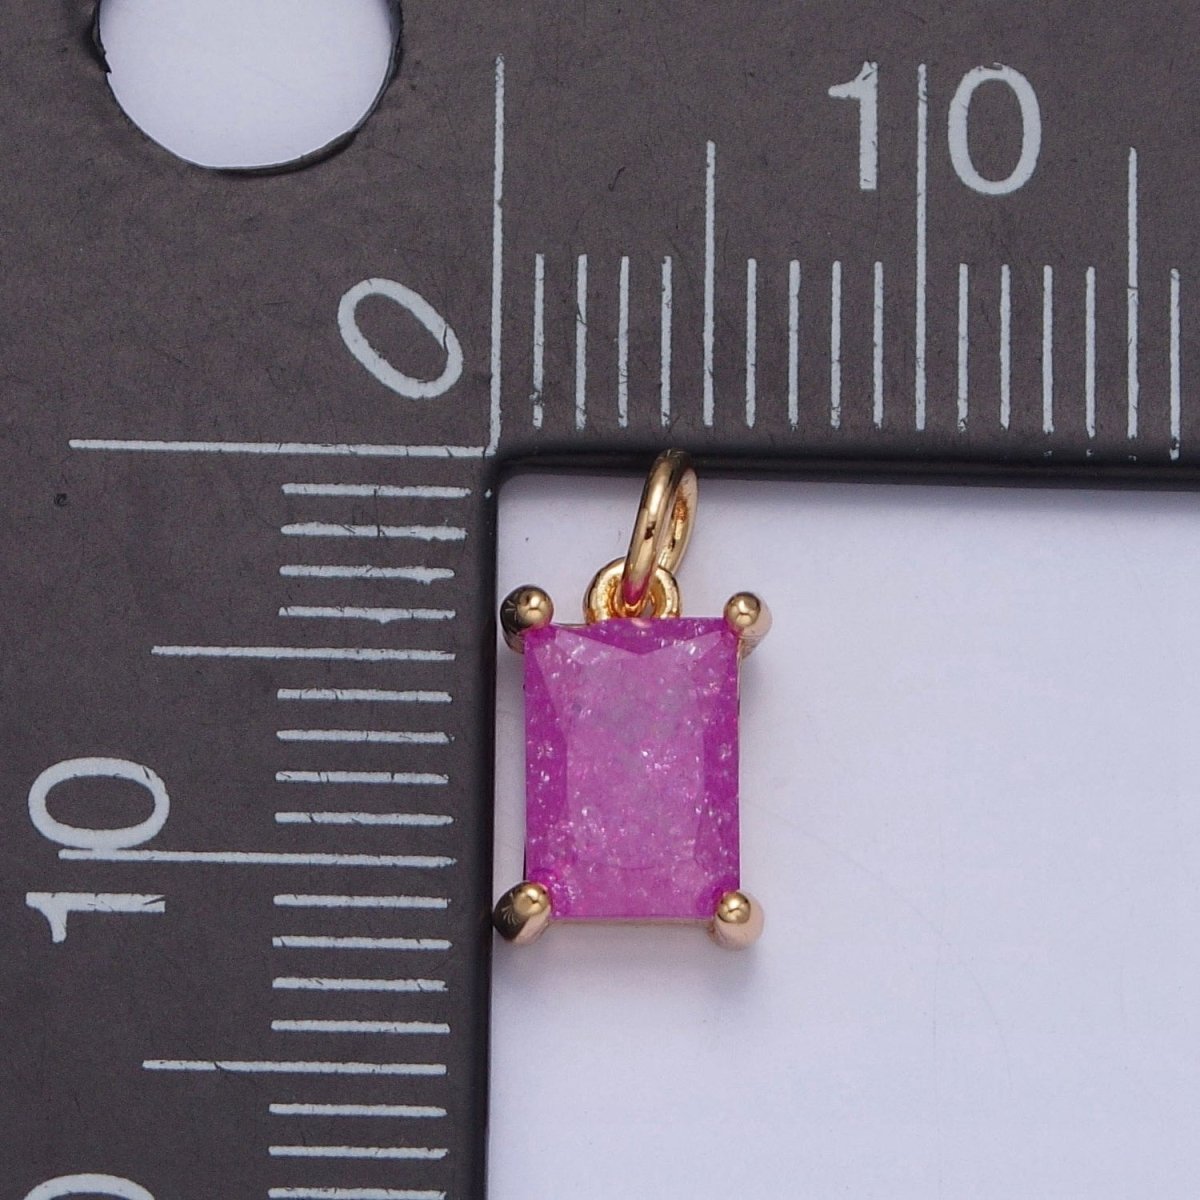 16K Gold Filled Sparkly Pastel Emerald Cut Cubic Zirconia Charm Jewelry Making Component Rectangle Square Add on Charm | X-268-X-272 - DLUXCA